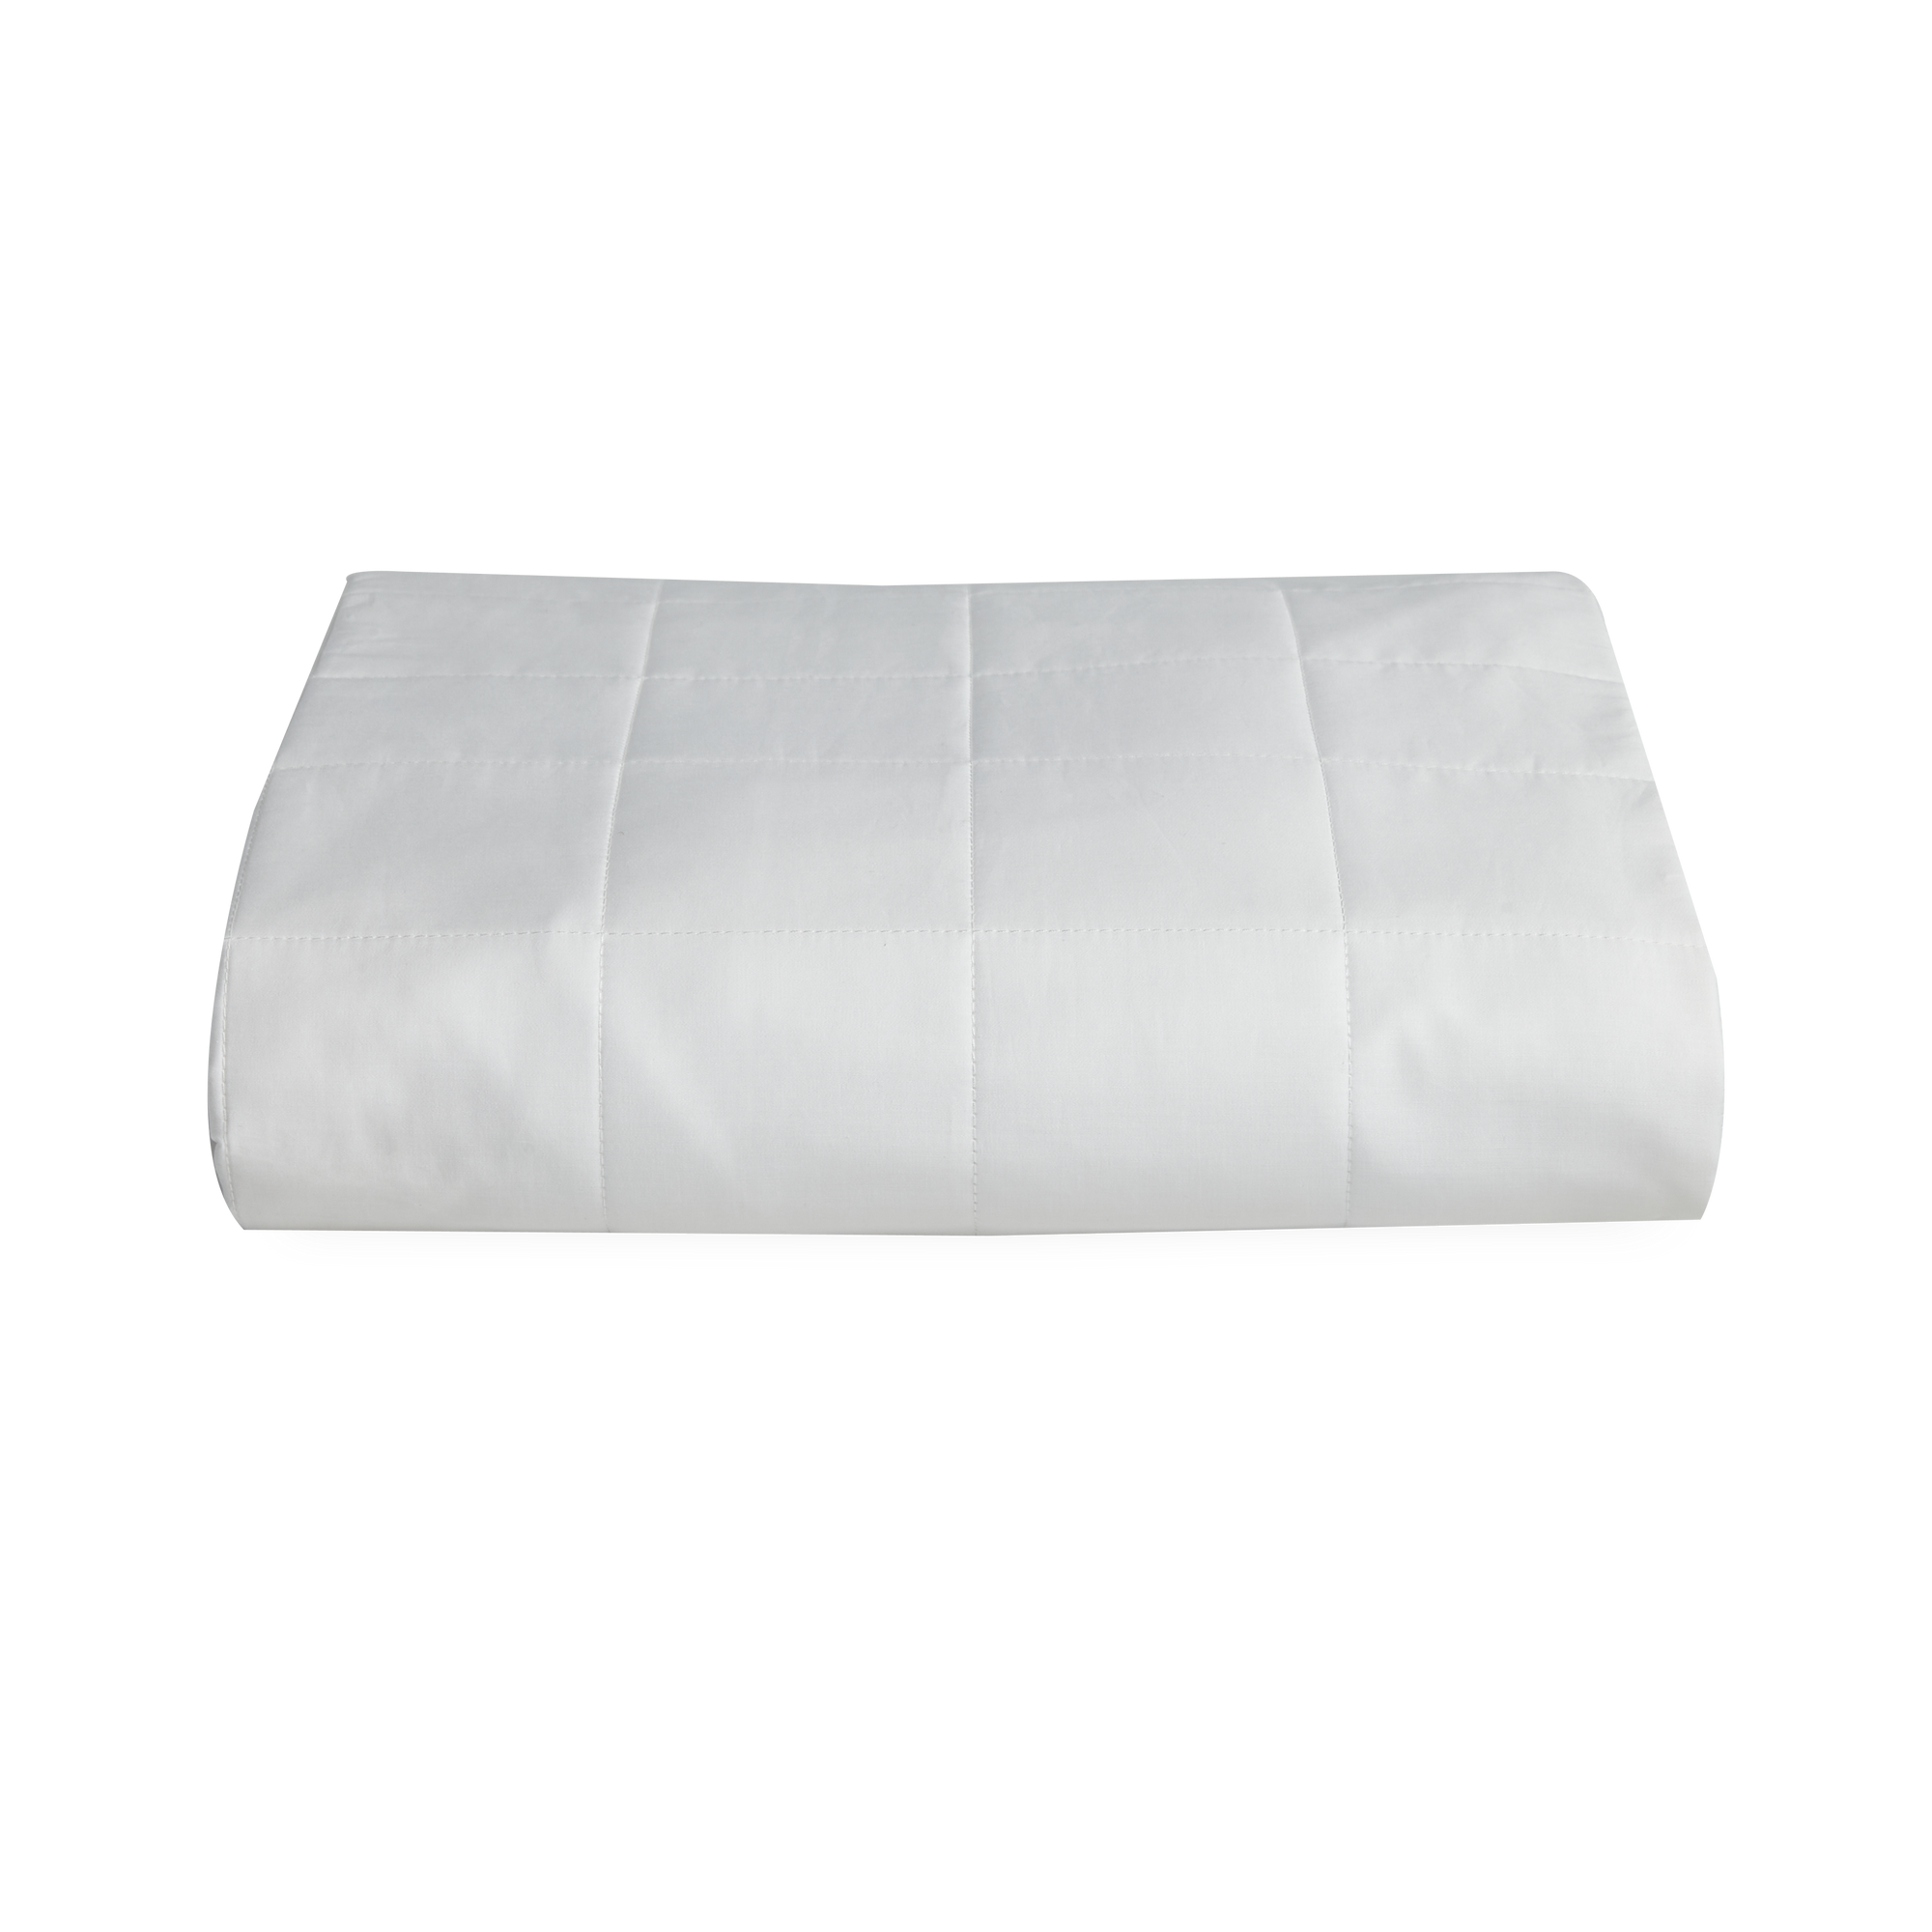 Add a layer of protection to your mattress with our quilted matress protector.